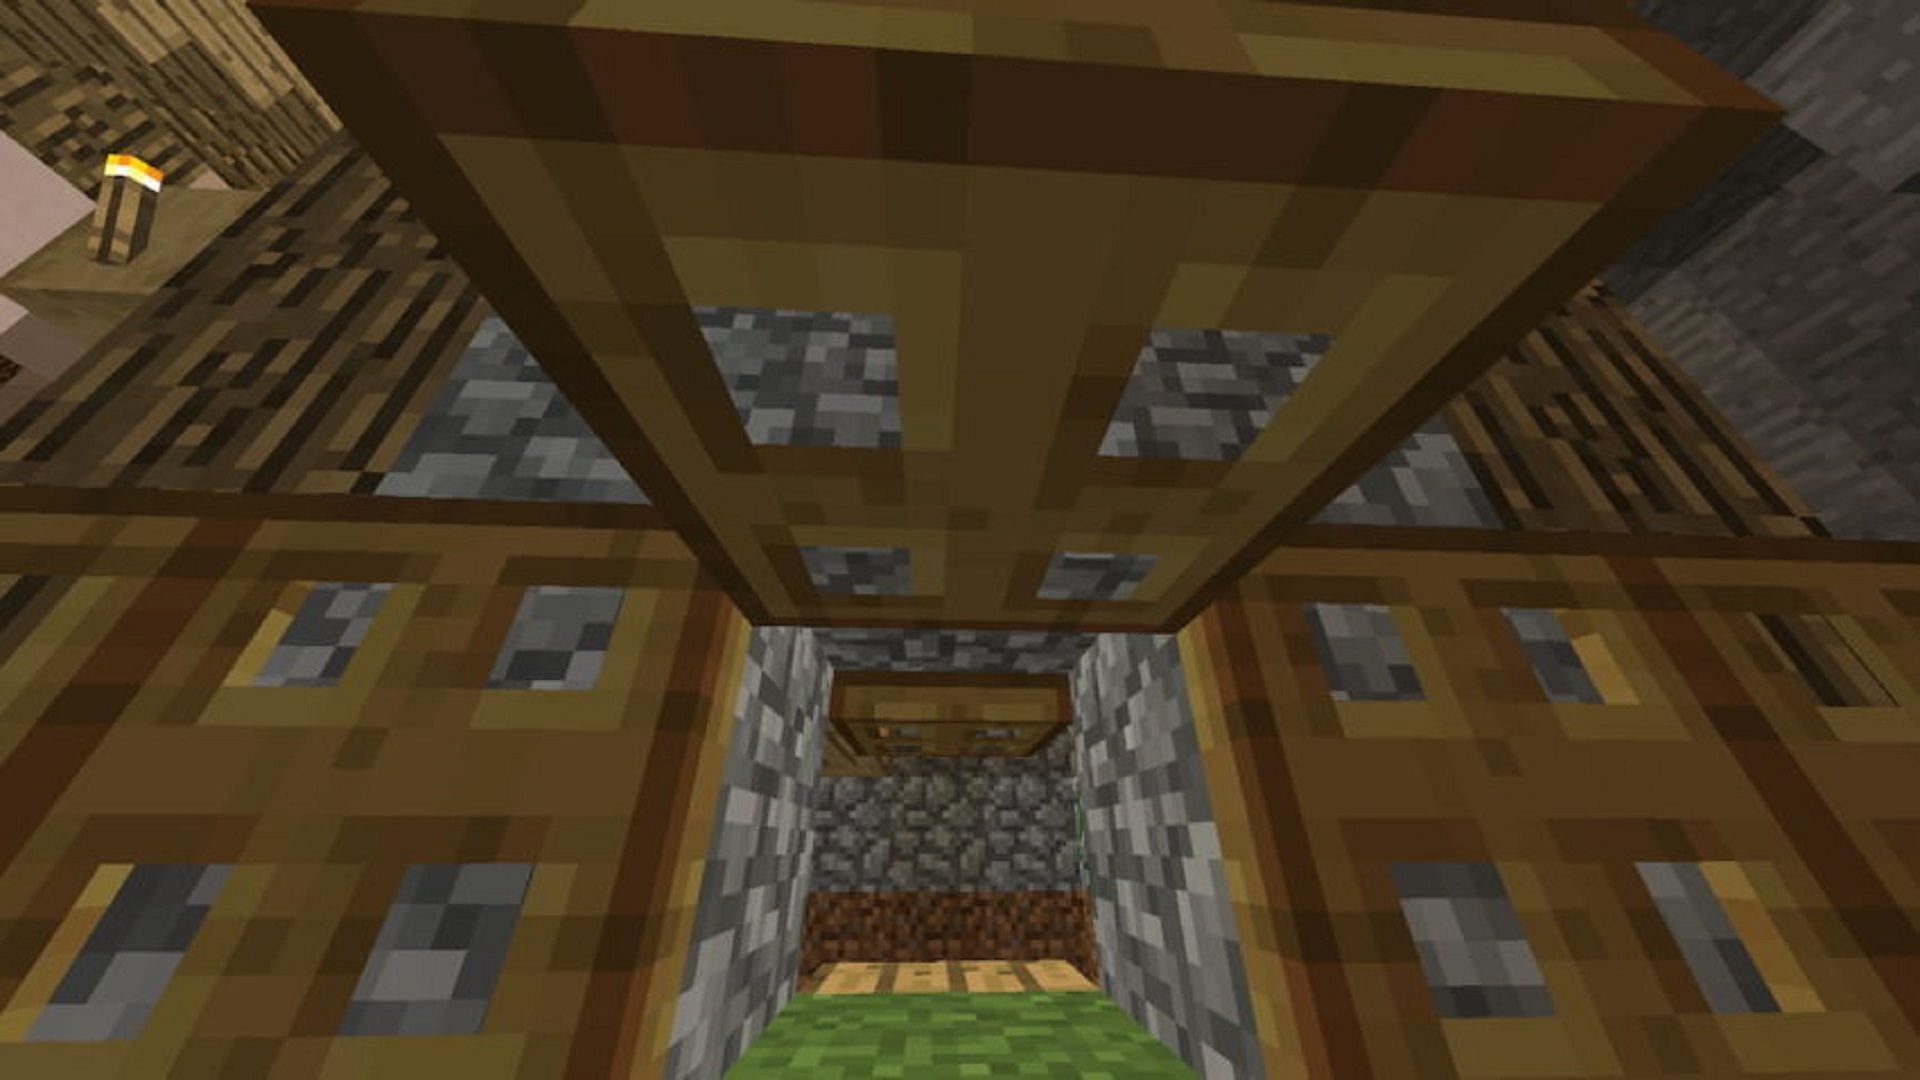 Hatches can create comfortable entrances that stay mostly out of sight (Image via Mojang)